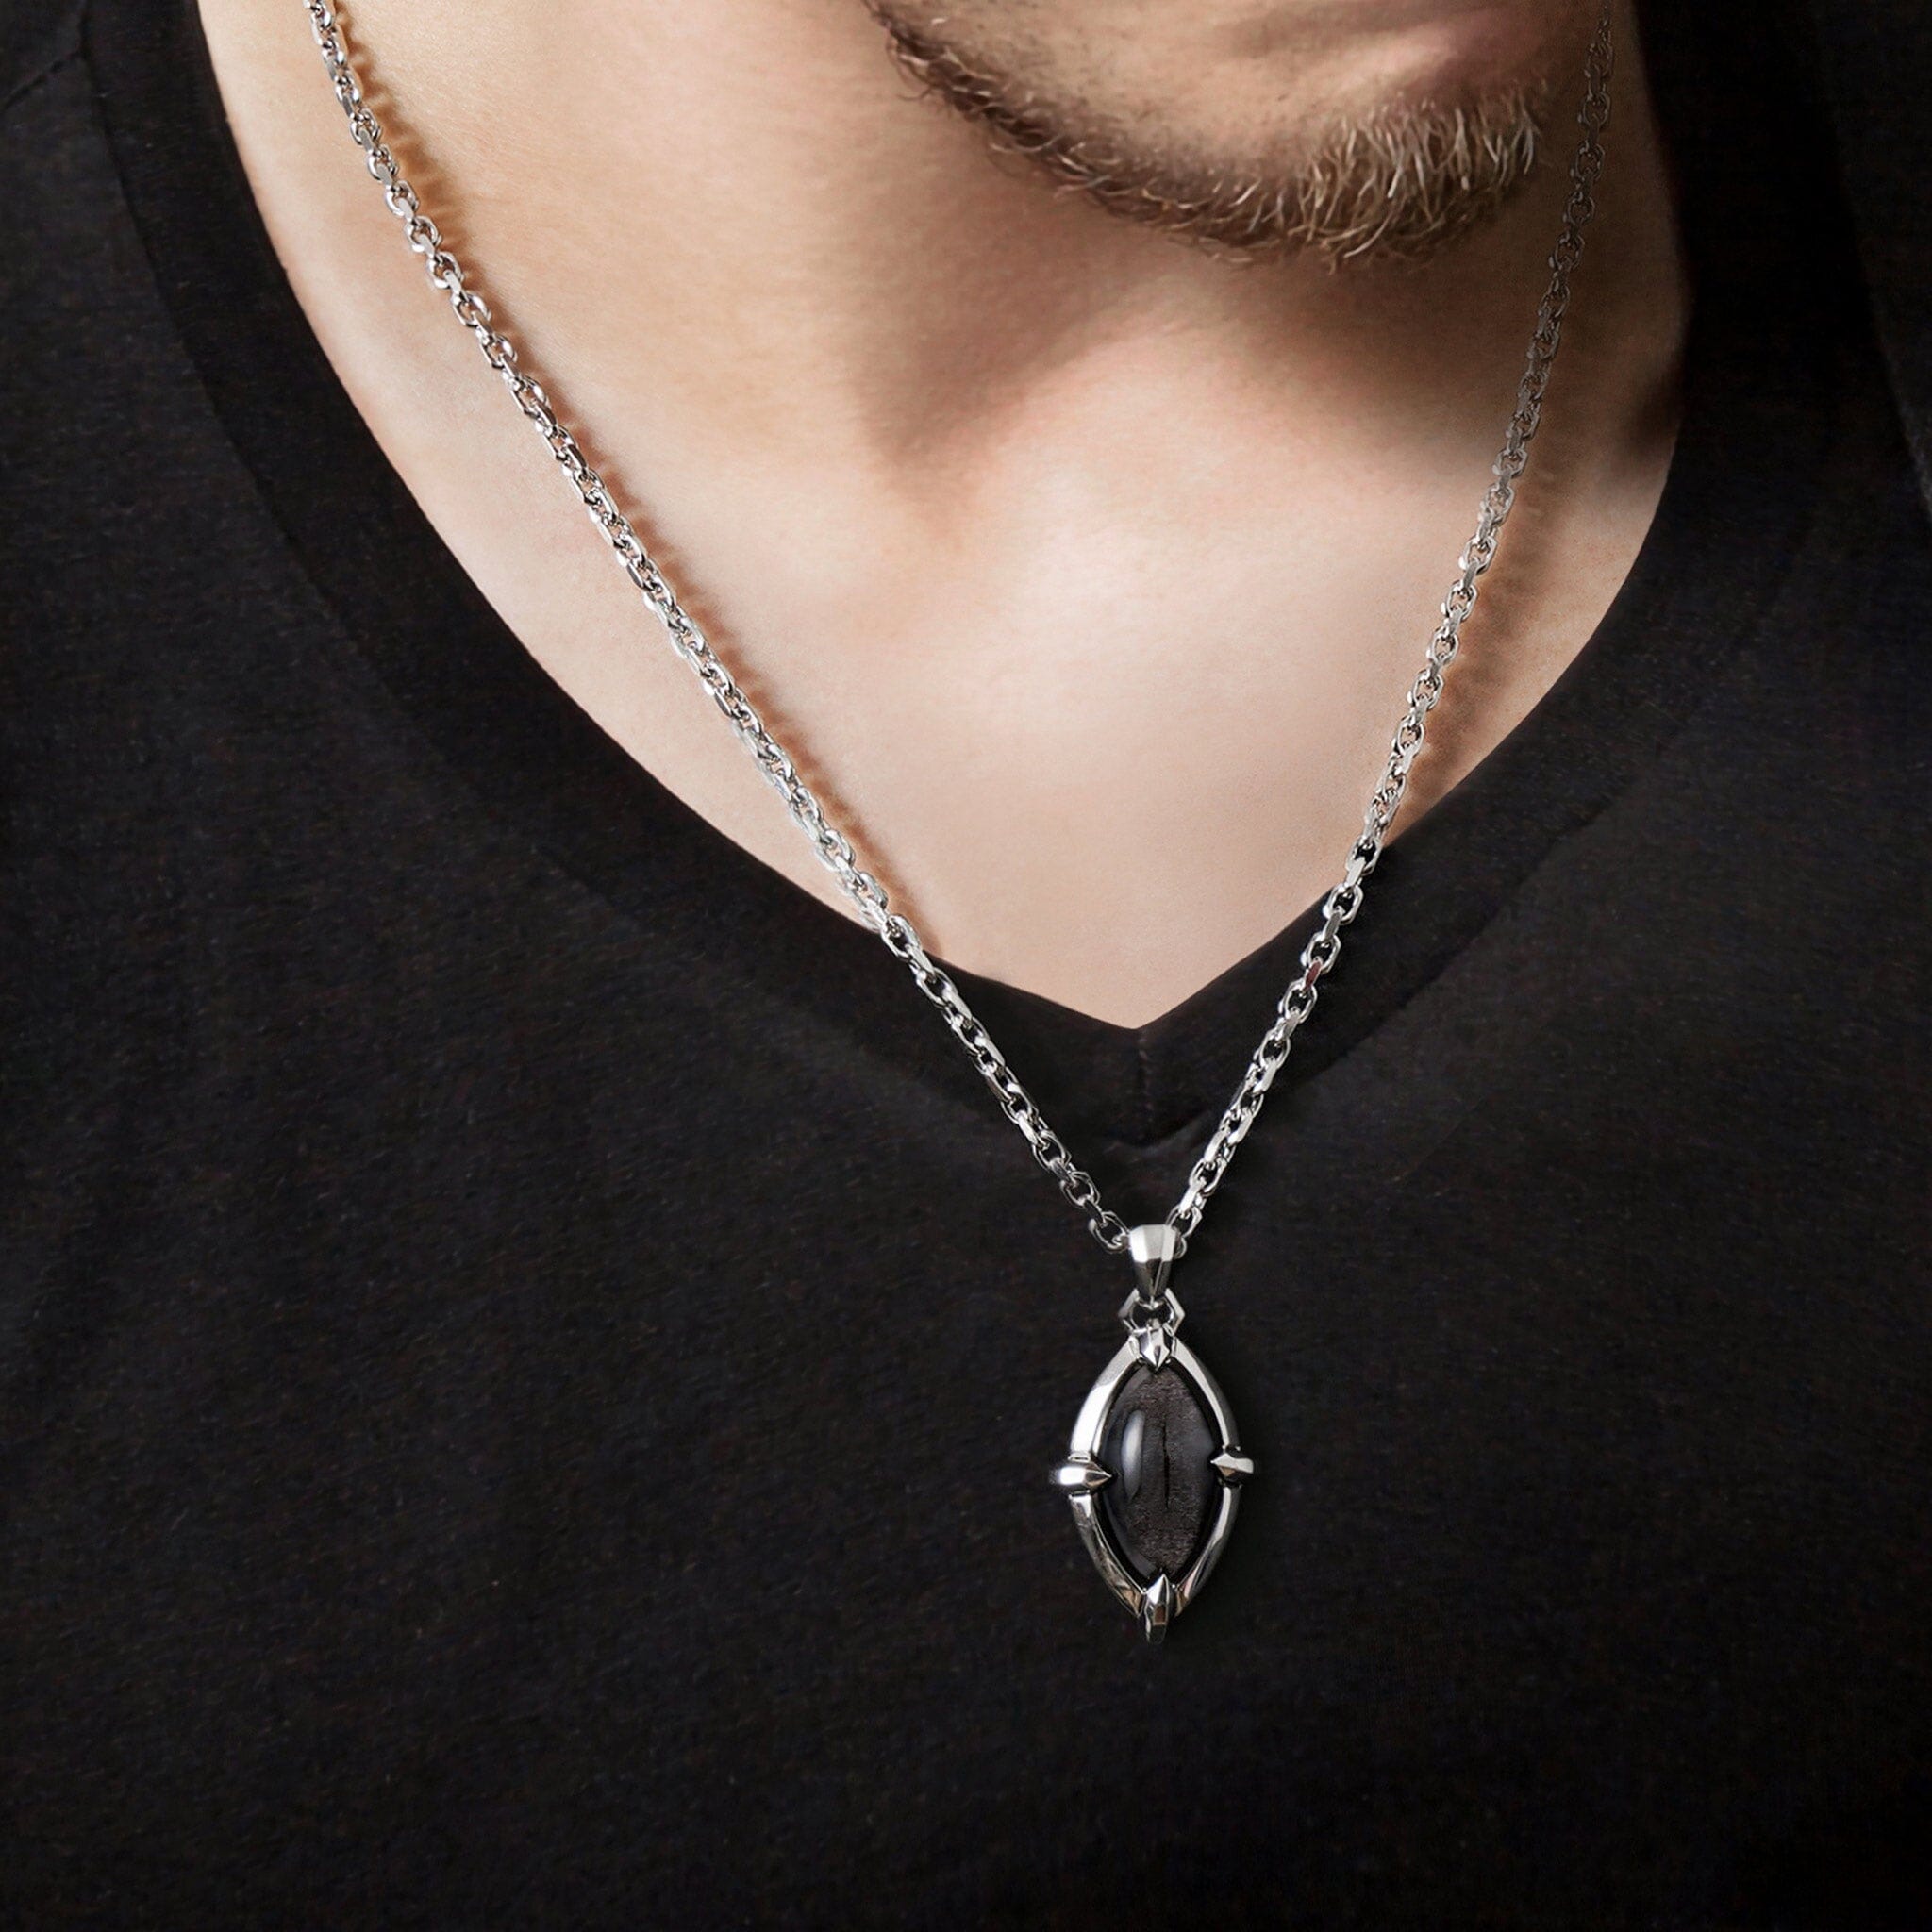 Men's Necklace of Vision with Silver Obsidian Necklaces WAA FASHION GROUP 